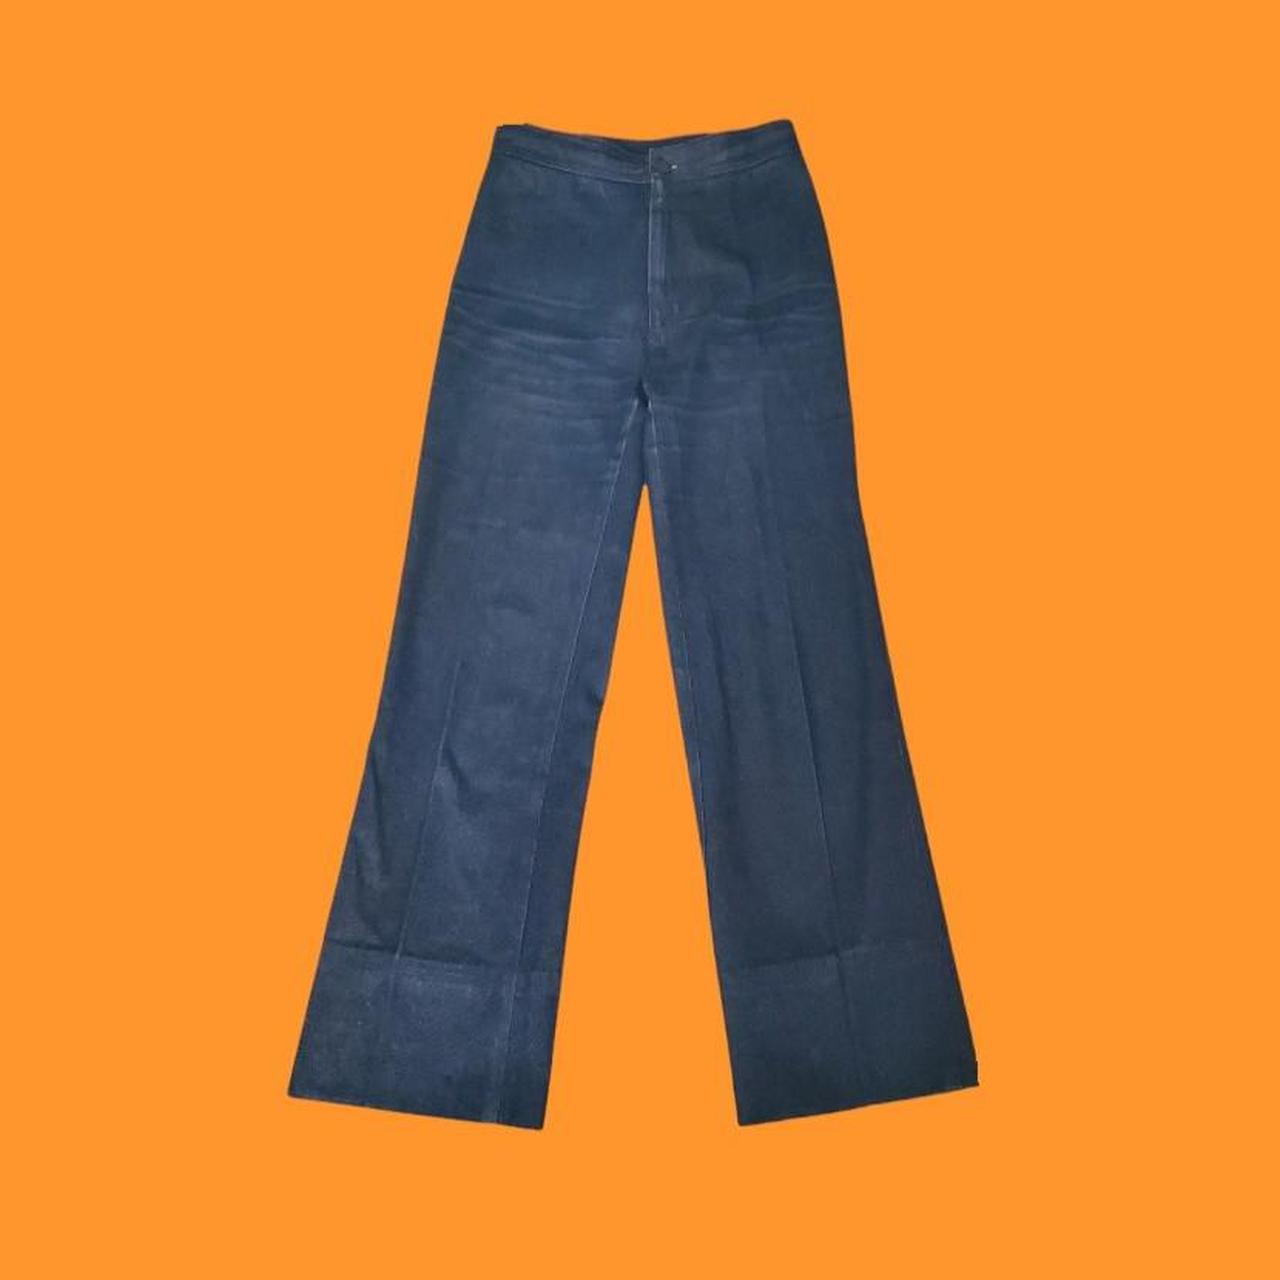 Product Image 2 - True Vintage jeans from the